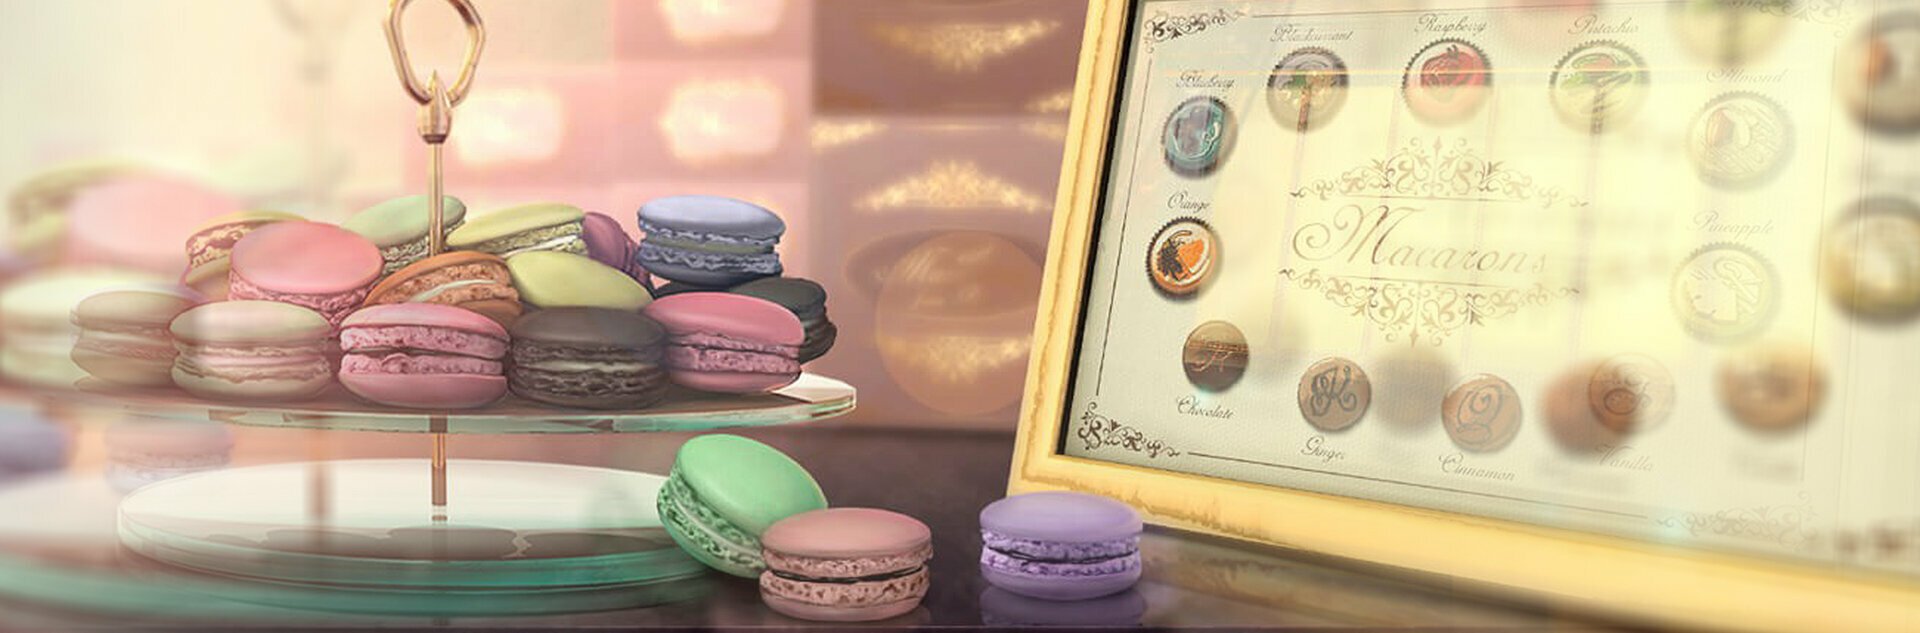 Macarons Free Spins